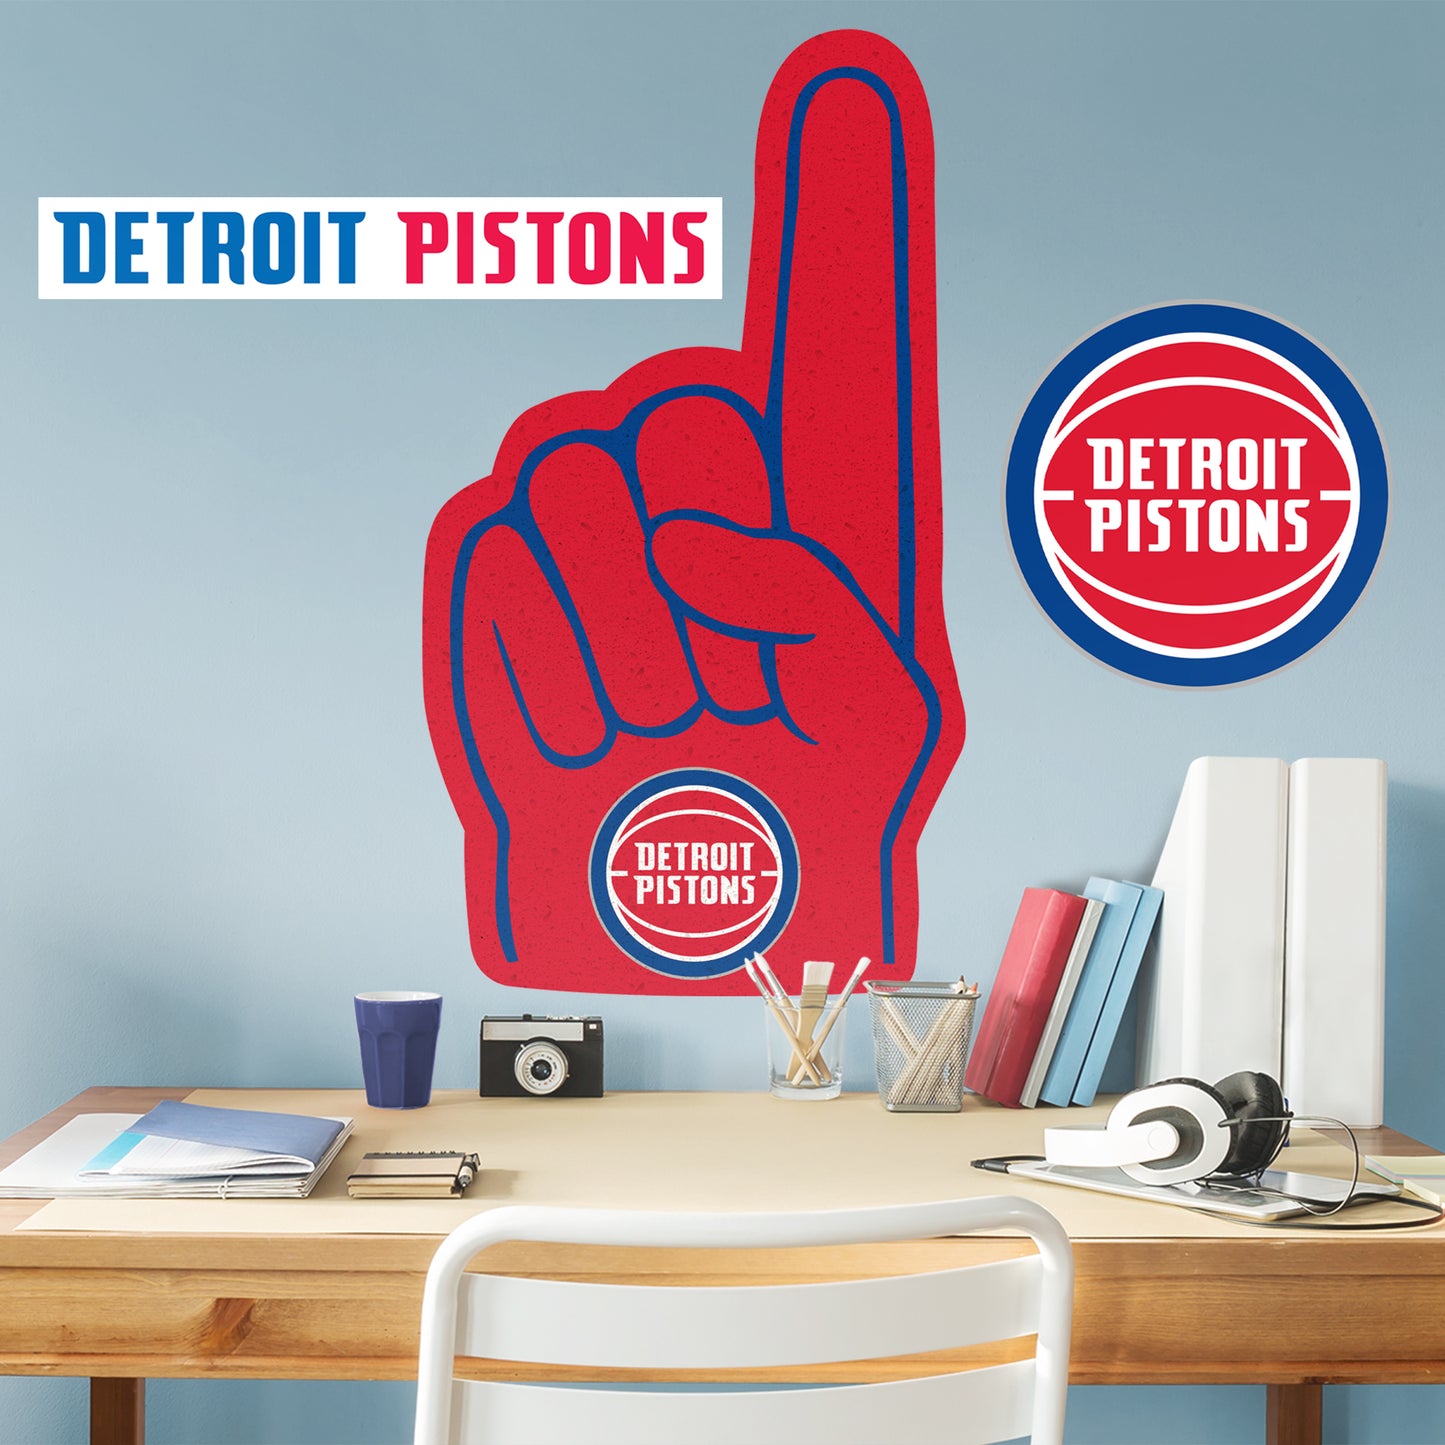 Detroit Pistons: Foam Finger - Officially Licensed NBA Removable Adhesive Decal